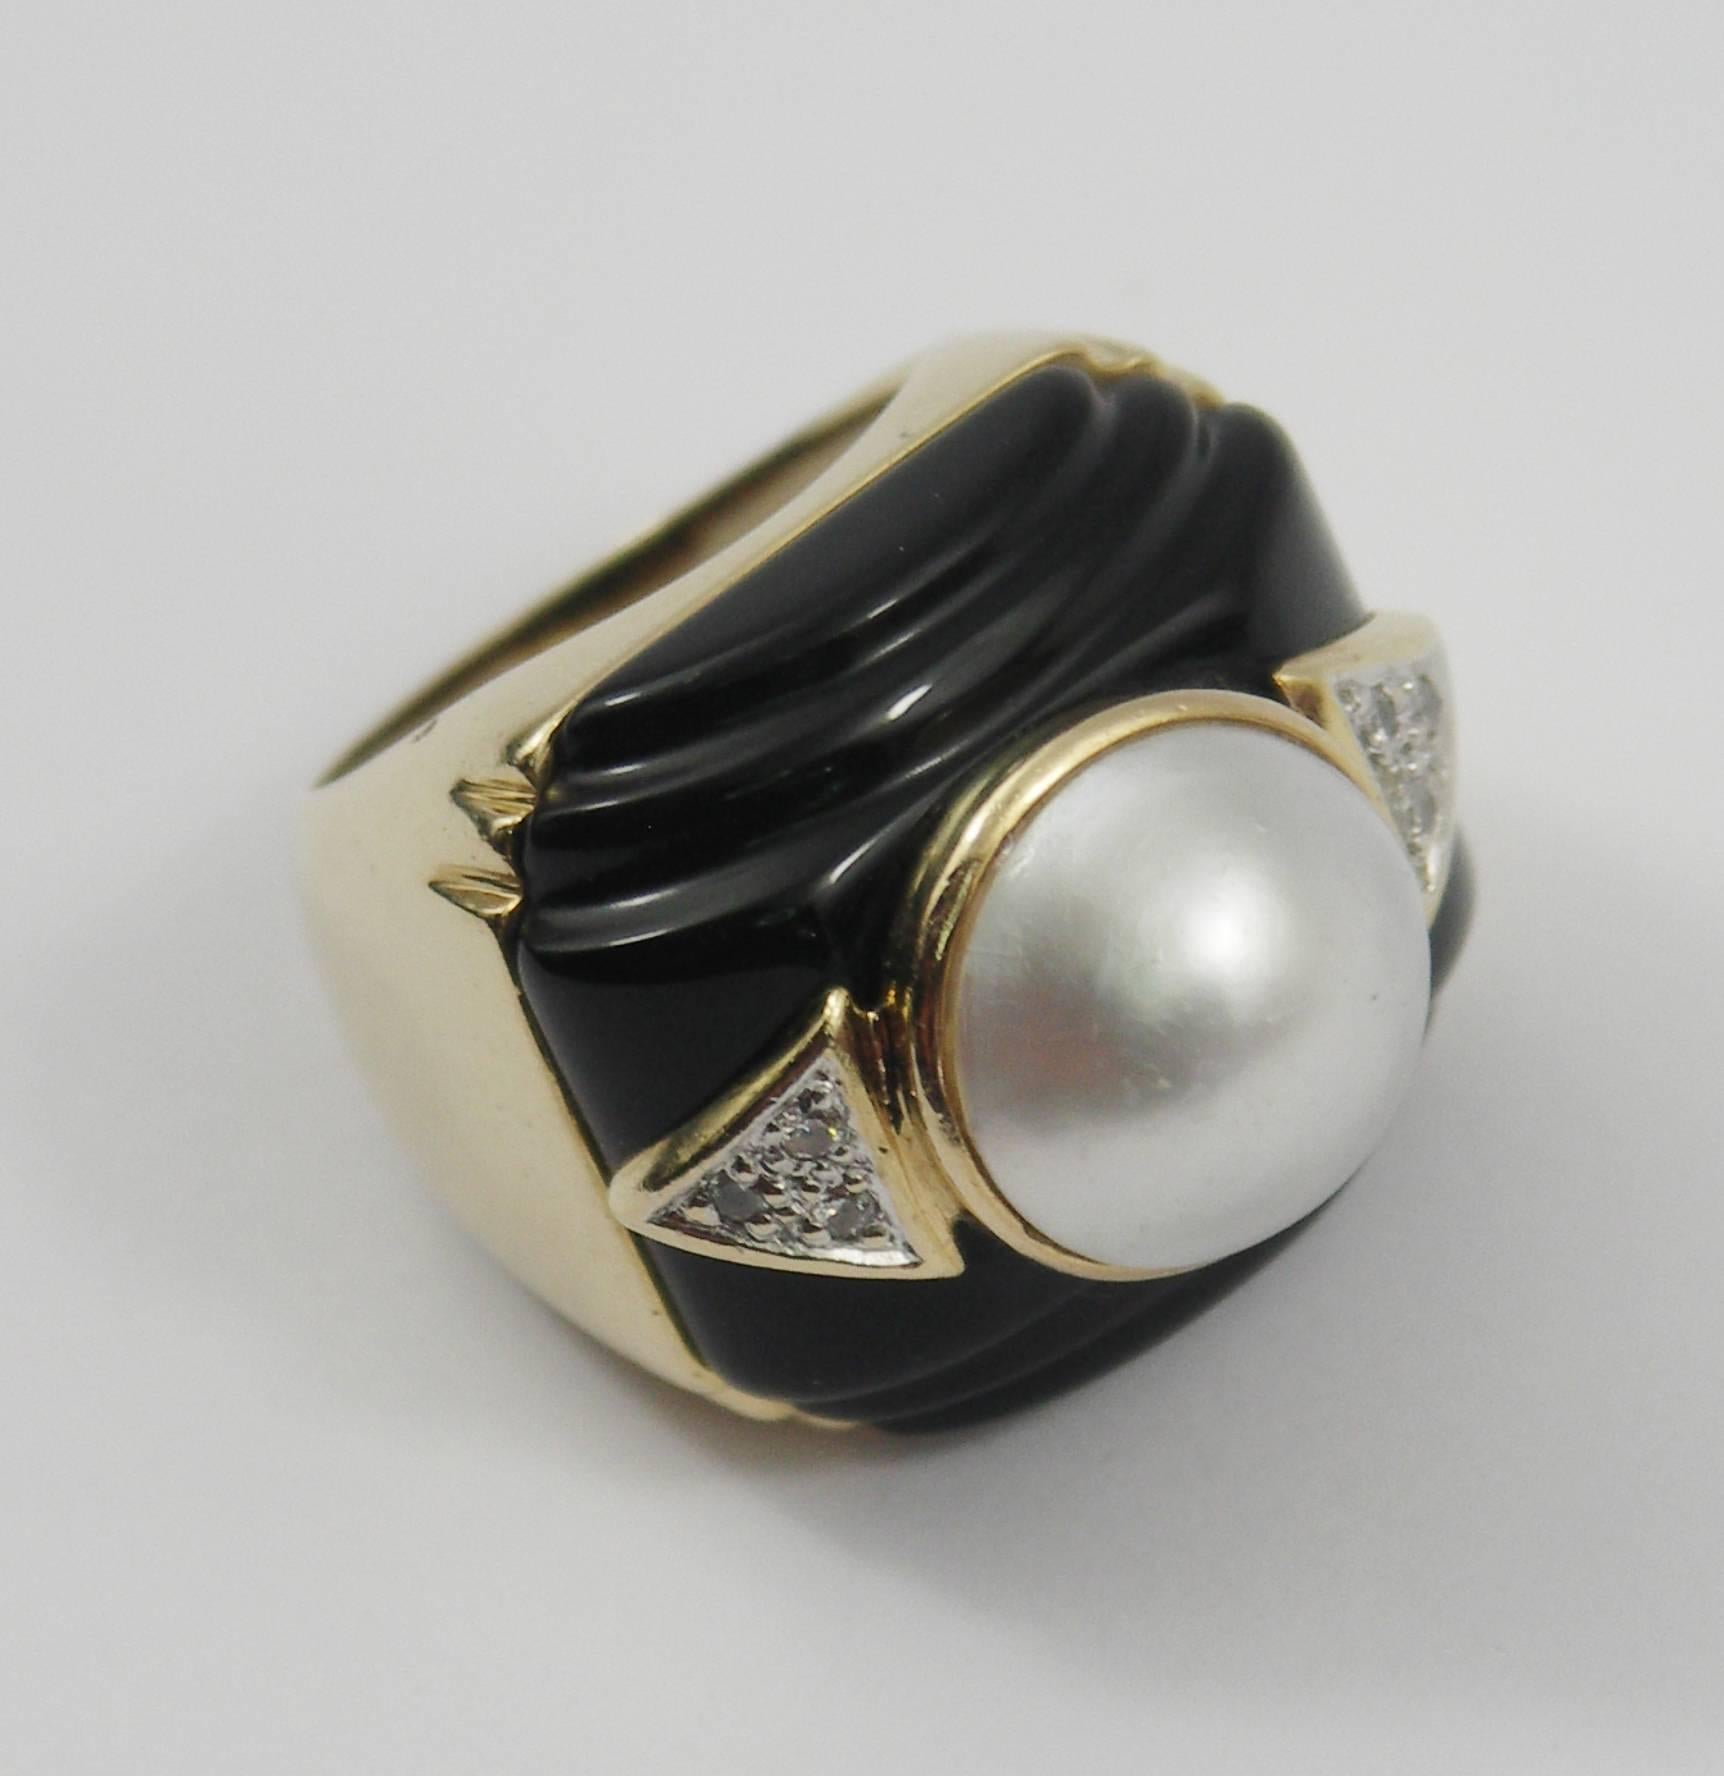 A 14K yellow gold ring centering one mabe pearl measuring 13mm, flanked by triangular motifs set with a total of 6 diamonds approximately 0.10ct total weight, above geometric fluted black onyx. Size 6.  Weight 17 grams.